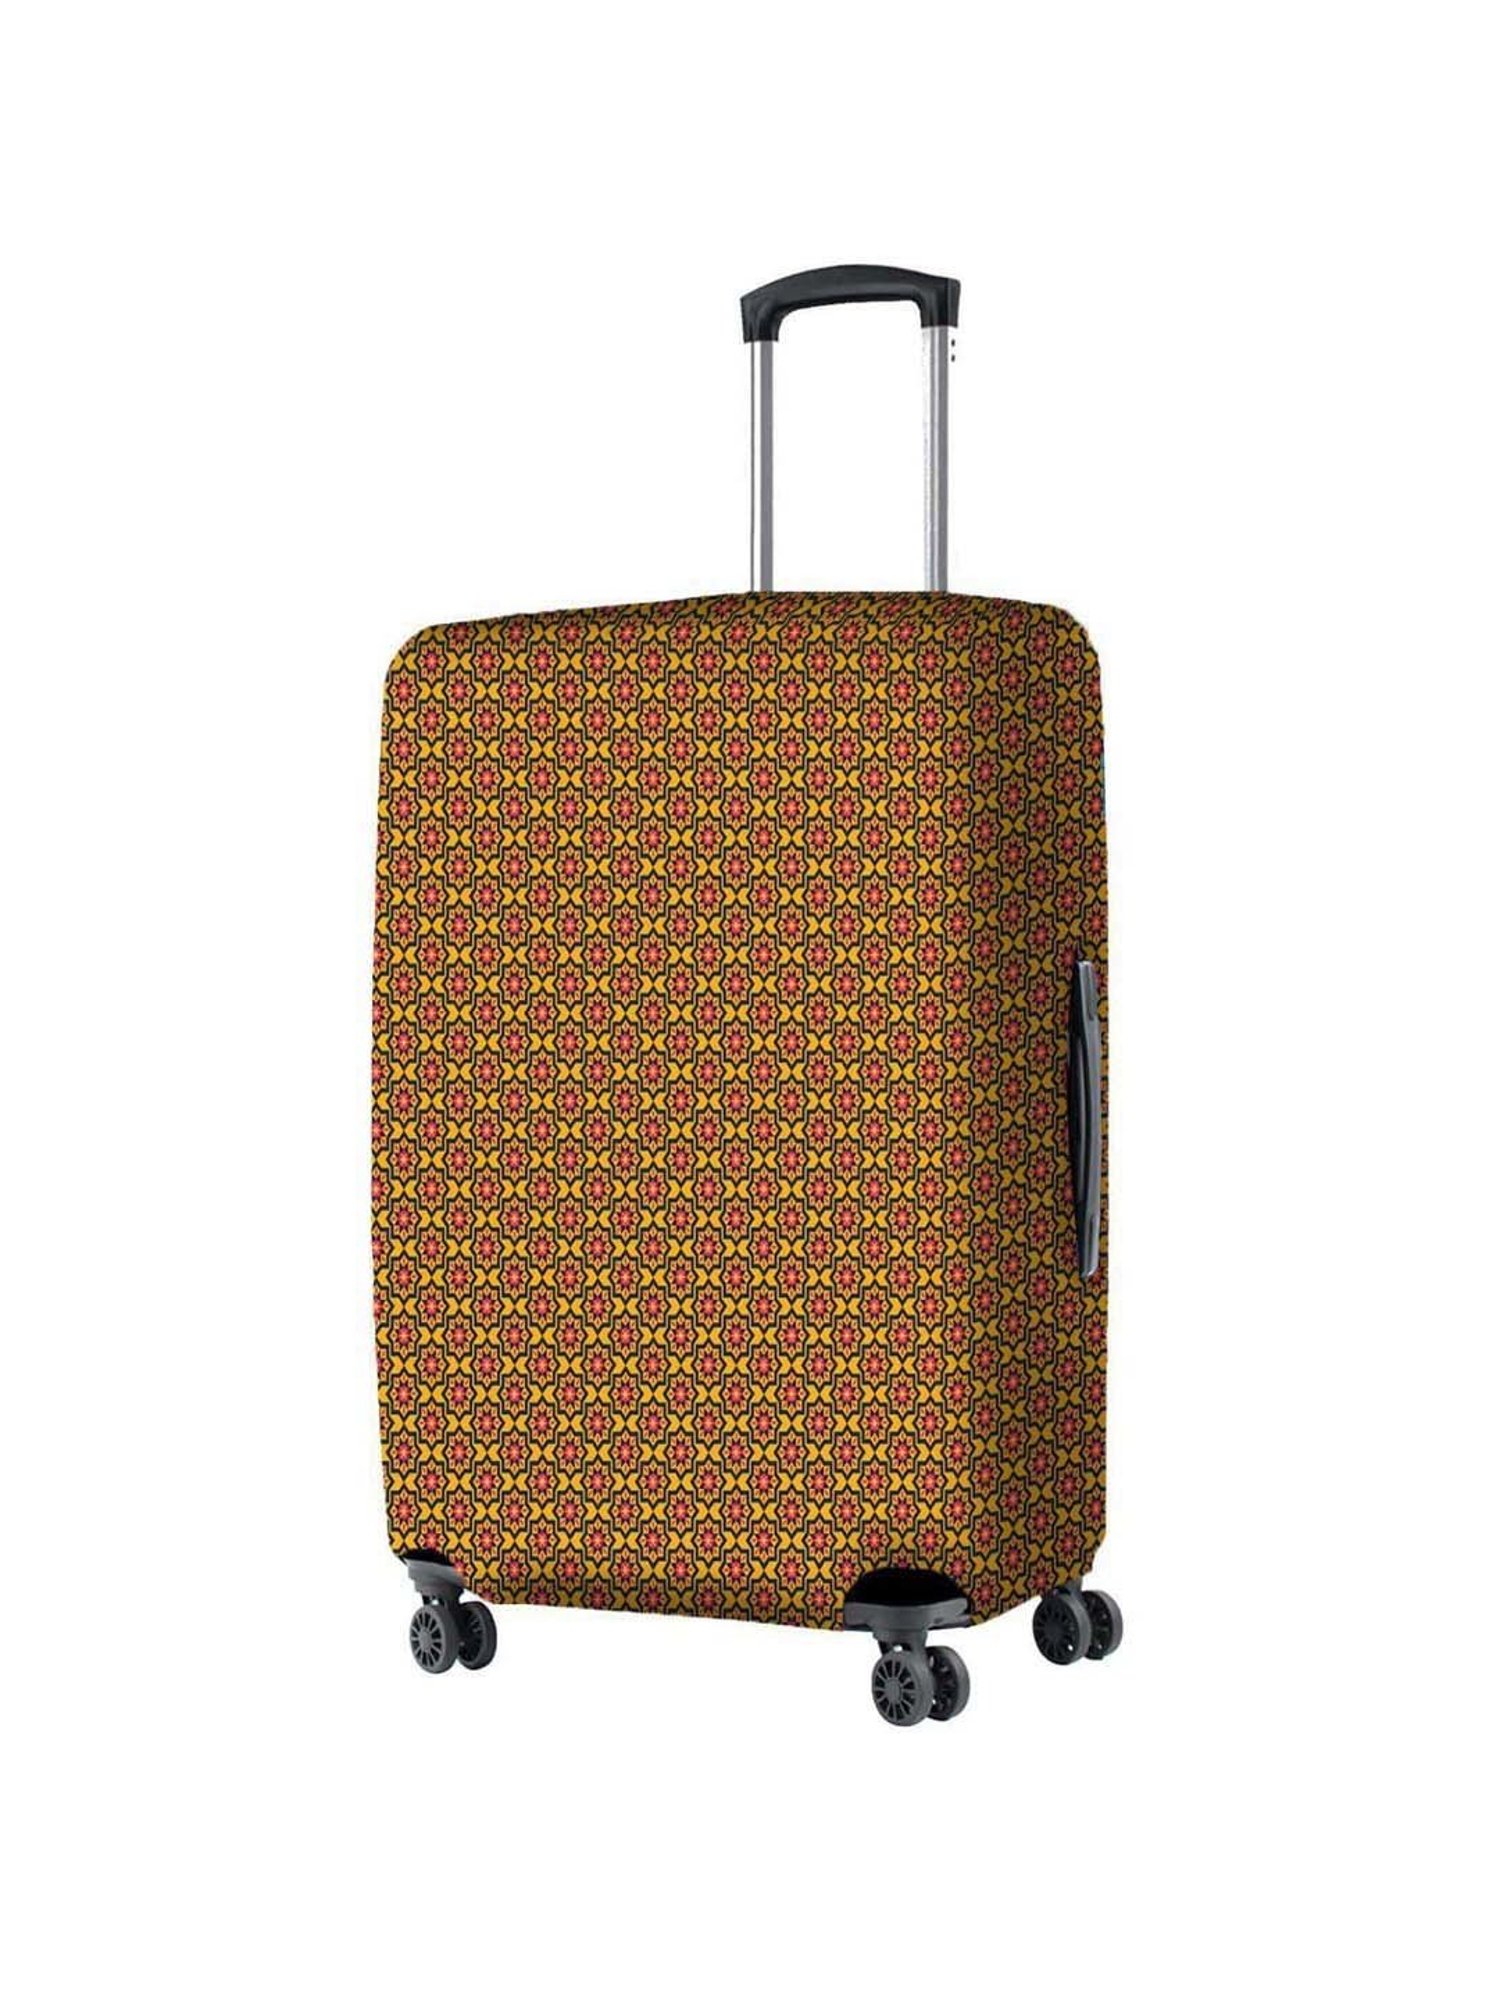 NASHER MILES Leopord Polyester 55 cm (20 Inch) Small Protective Luggage  Cover - Leopord Design Luggage Cover - Price History